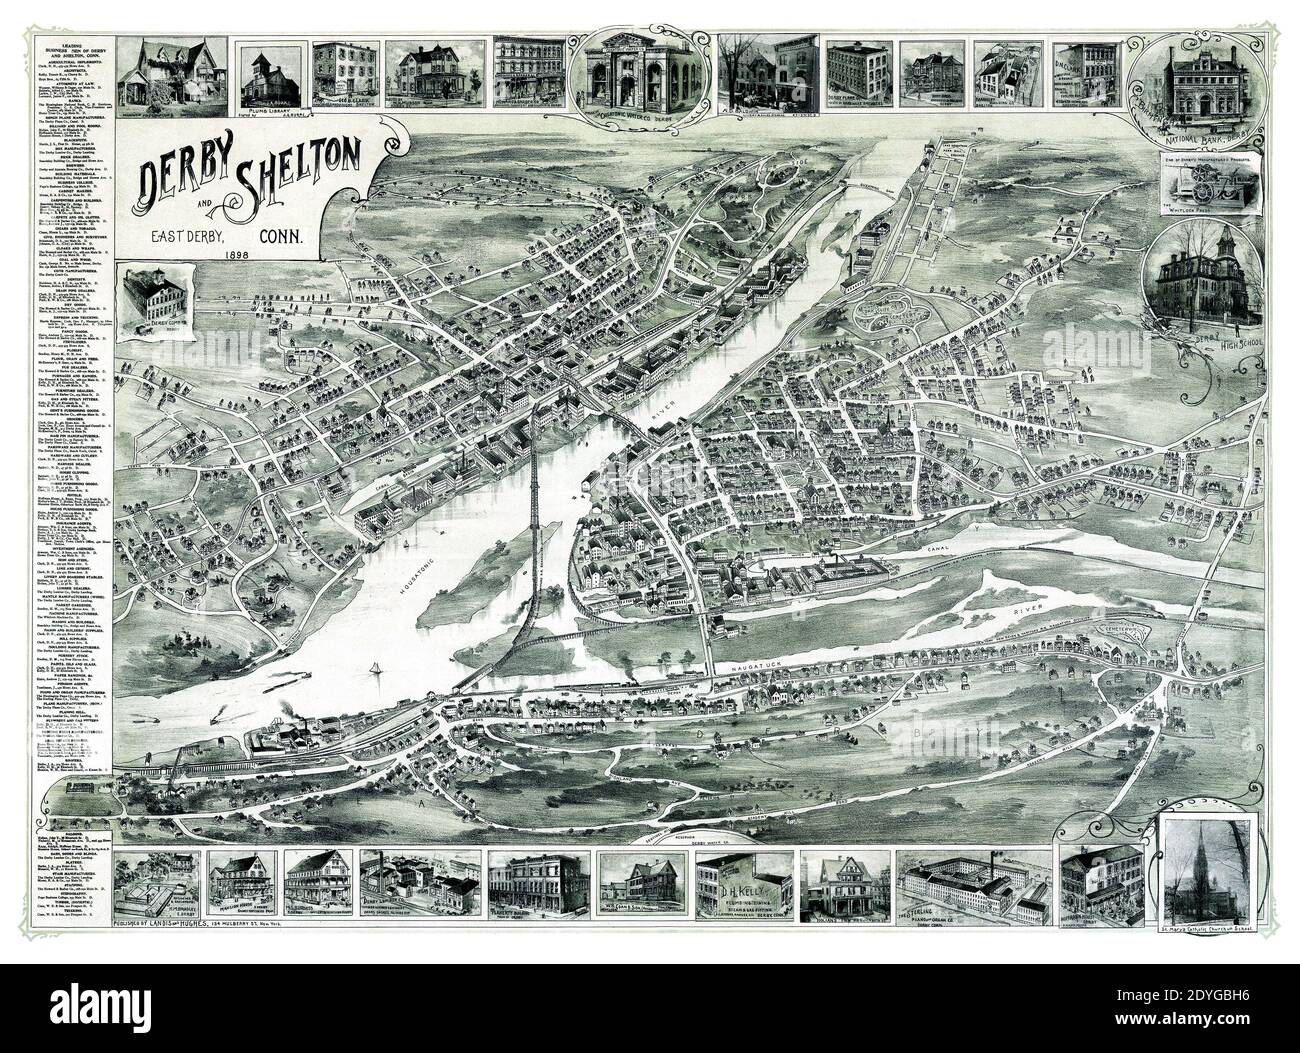 Perspective or birds-eye view of Derby and Shelton, Connecticut, for antique 1898 map. Note identification of street names, landmarks, businesses, railroads, and manufacturing buildings. This restored, detailed reproduction brings out a slight green tint. The map includes a business directory along with photos and illustrations of local buildings and landmarks, making this map a great historical reference. Stock Photo